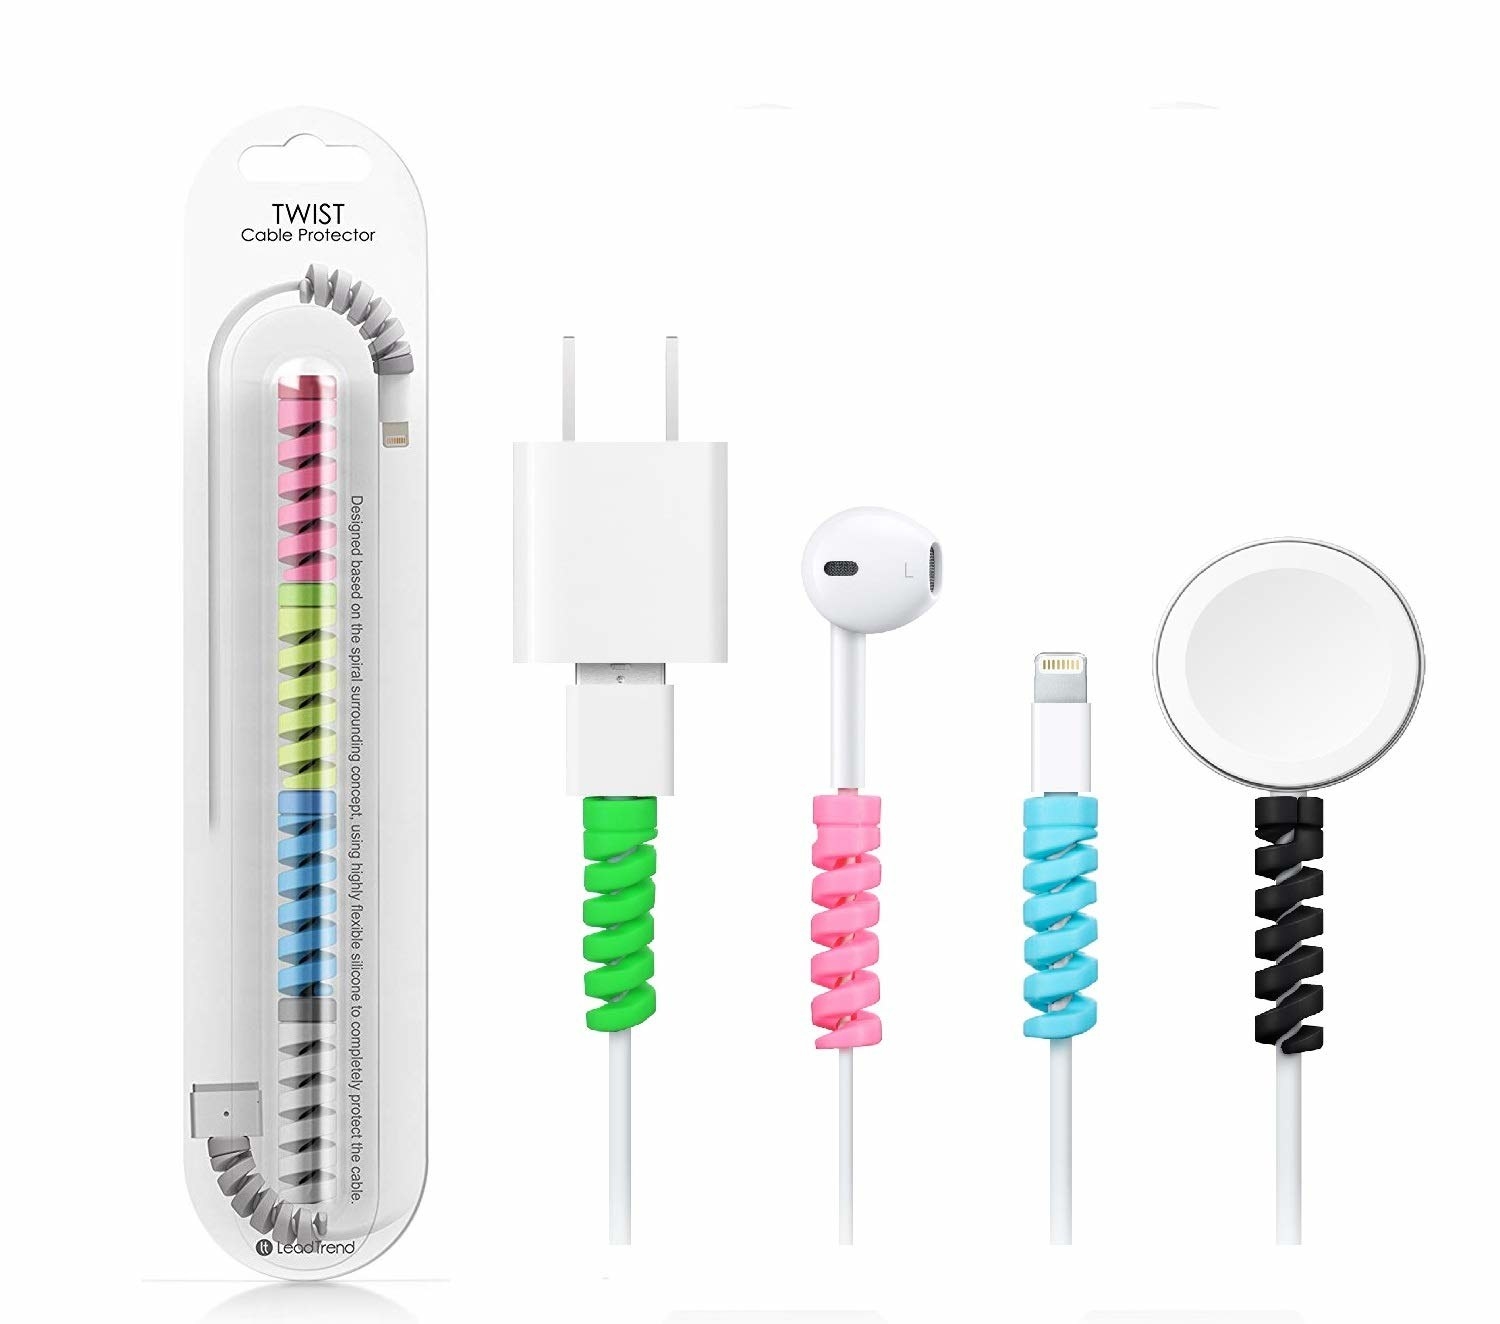 Various cables like chargers and earphones pictured with the cable protectors around them.